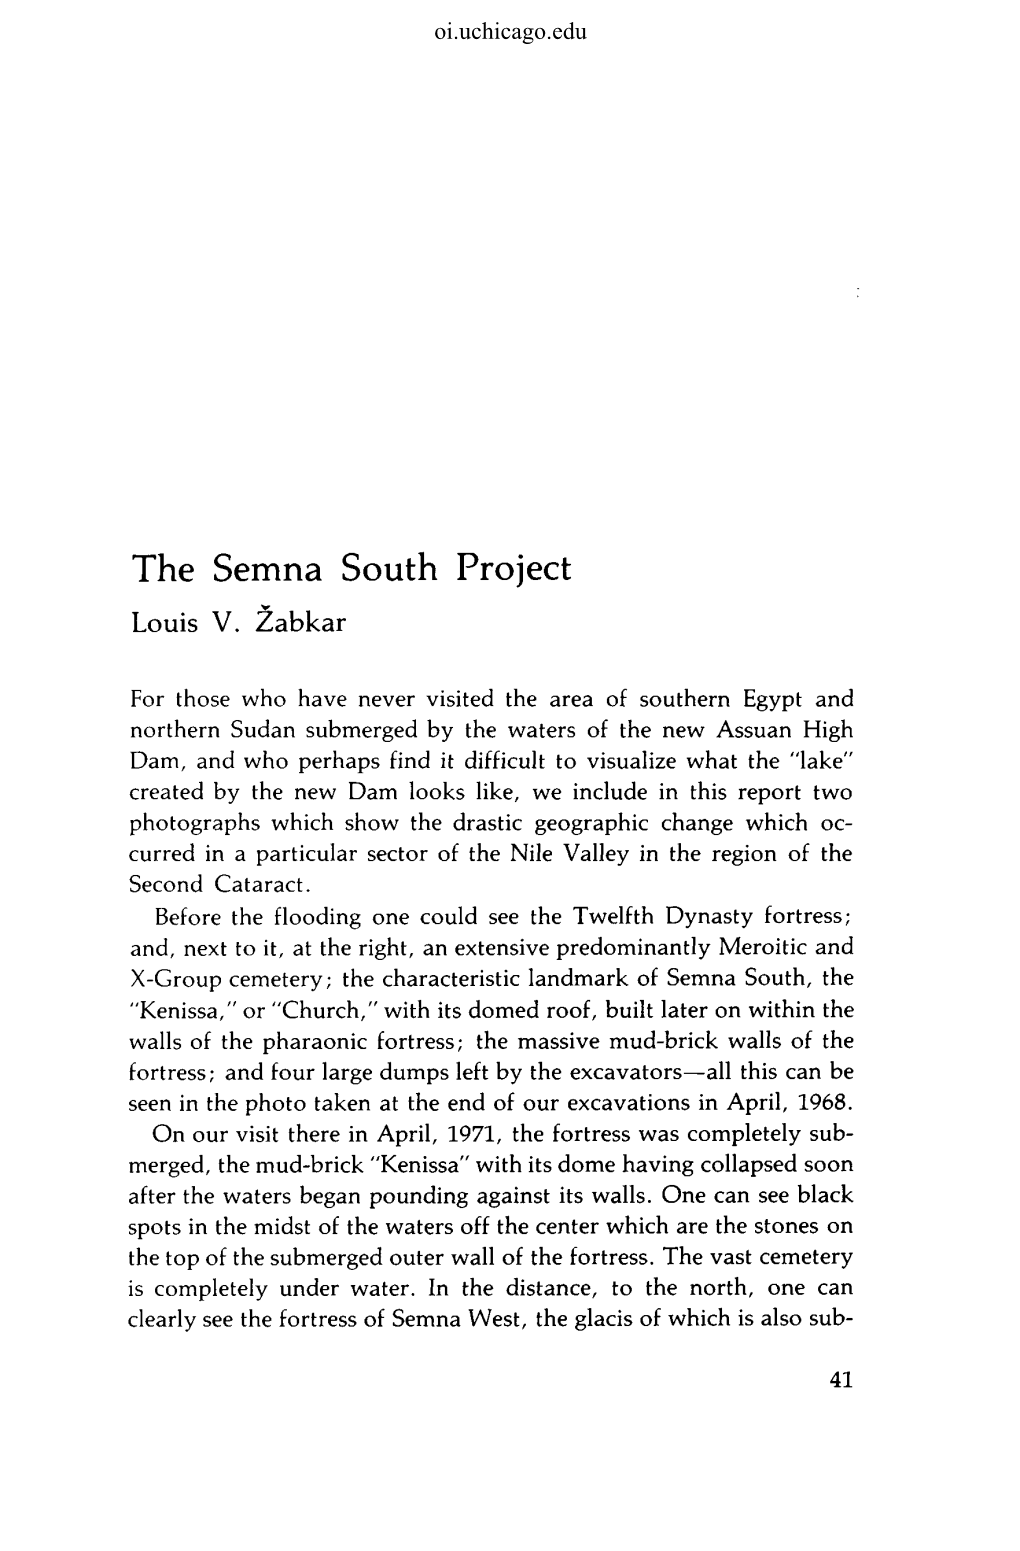 The Semna South Project Louis V